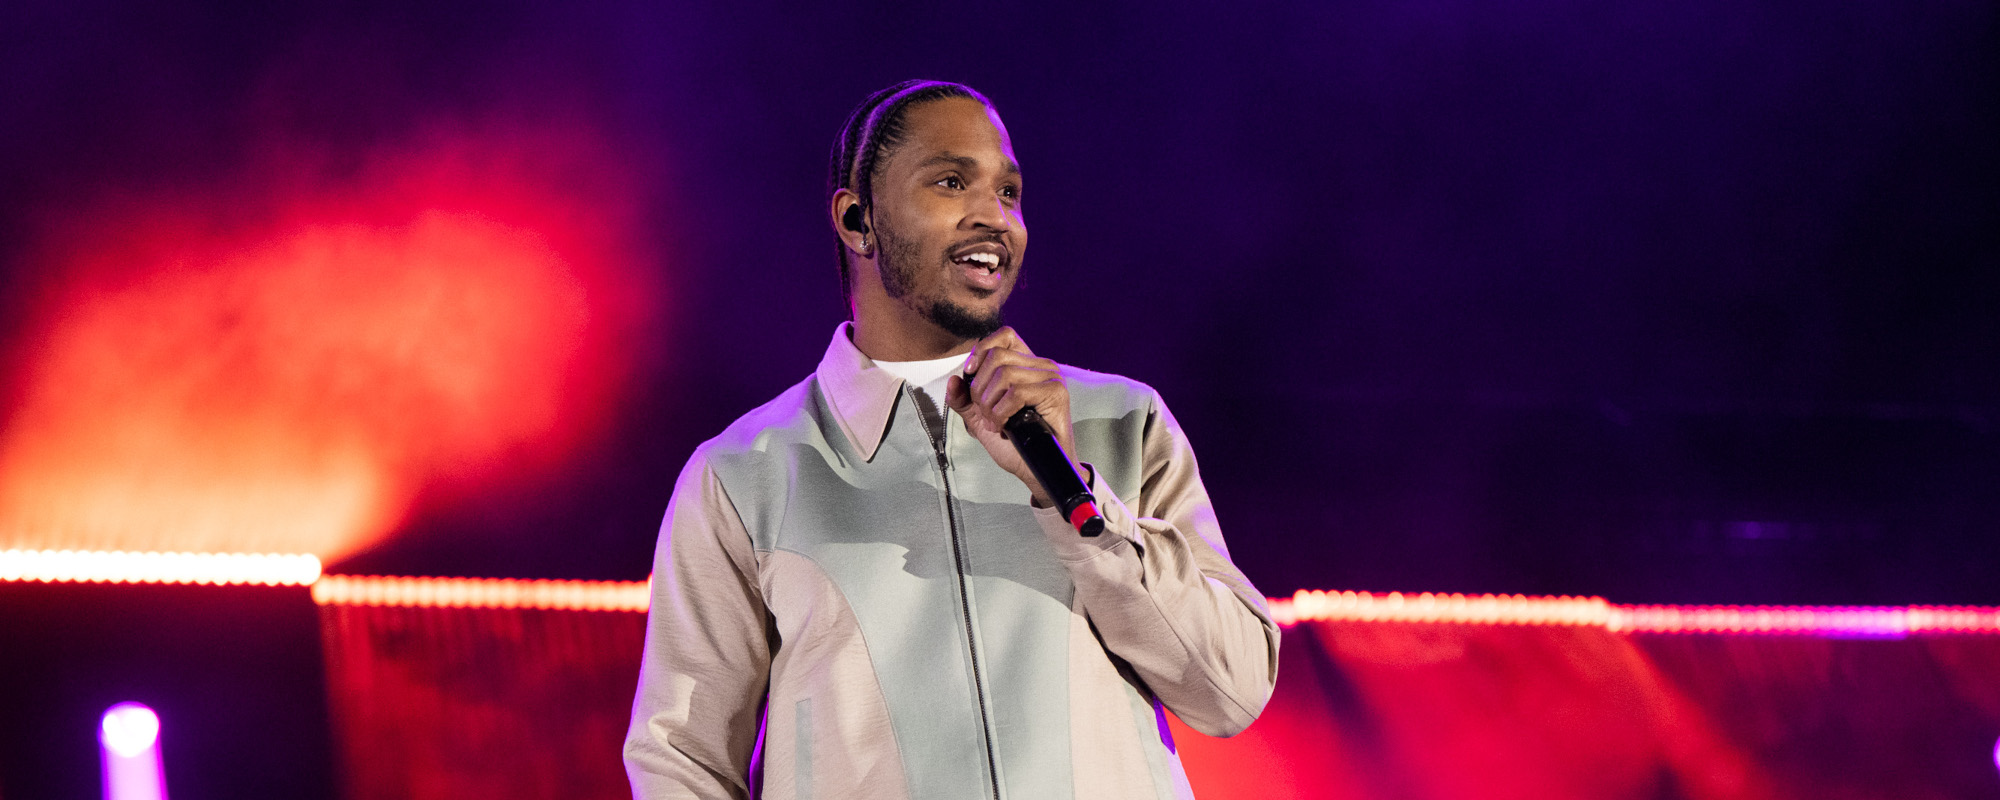 Trey Songz, Label and Manager Named in Sexual Assault Lawsuit